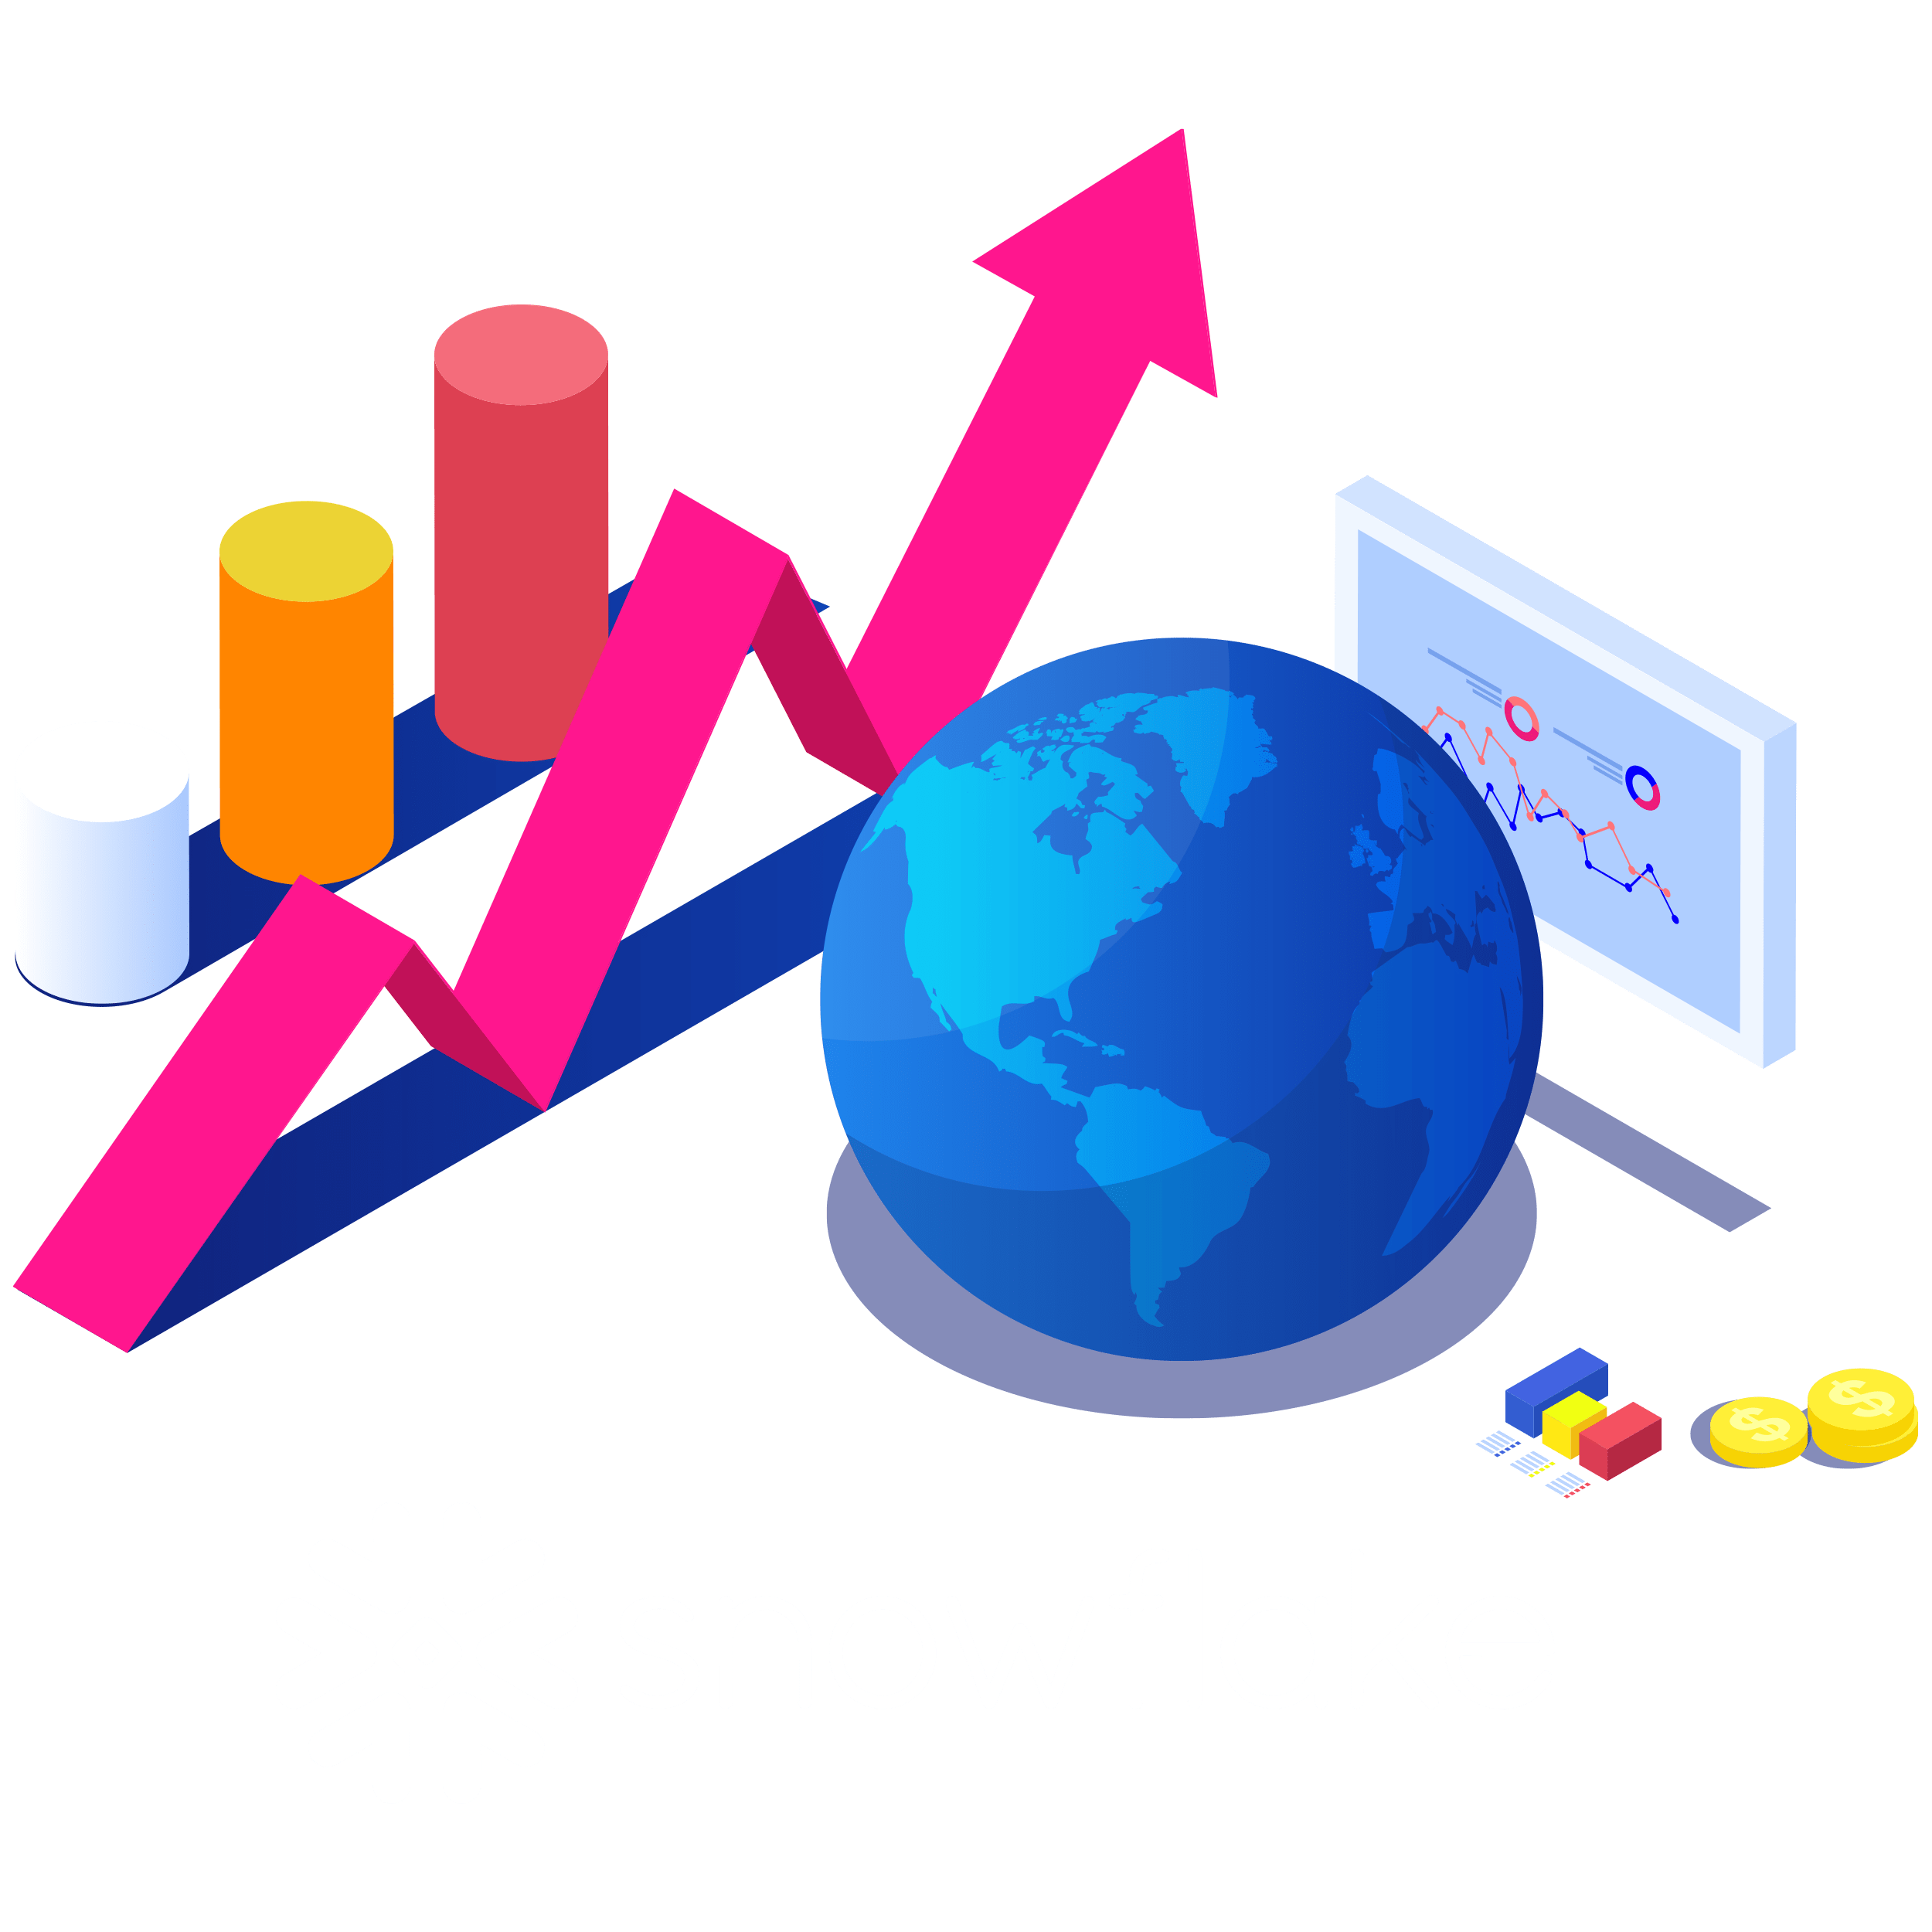 Snowflake logo surrounded by charts and graphs